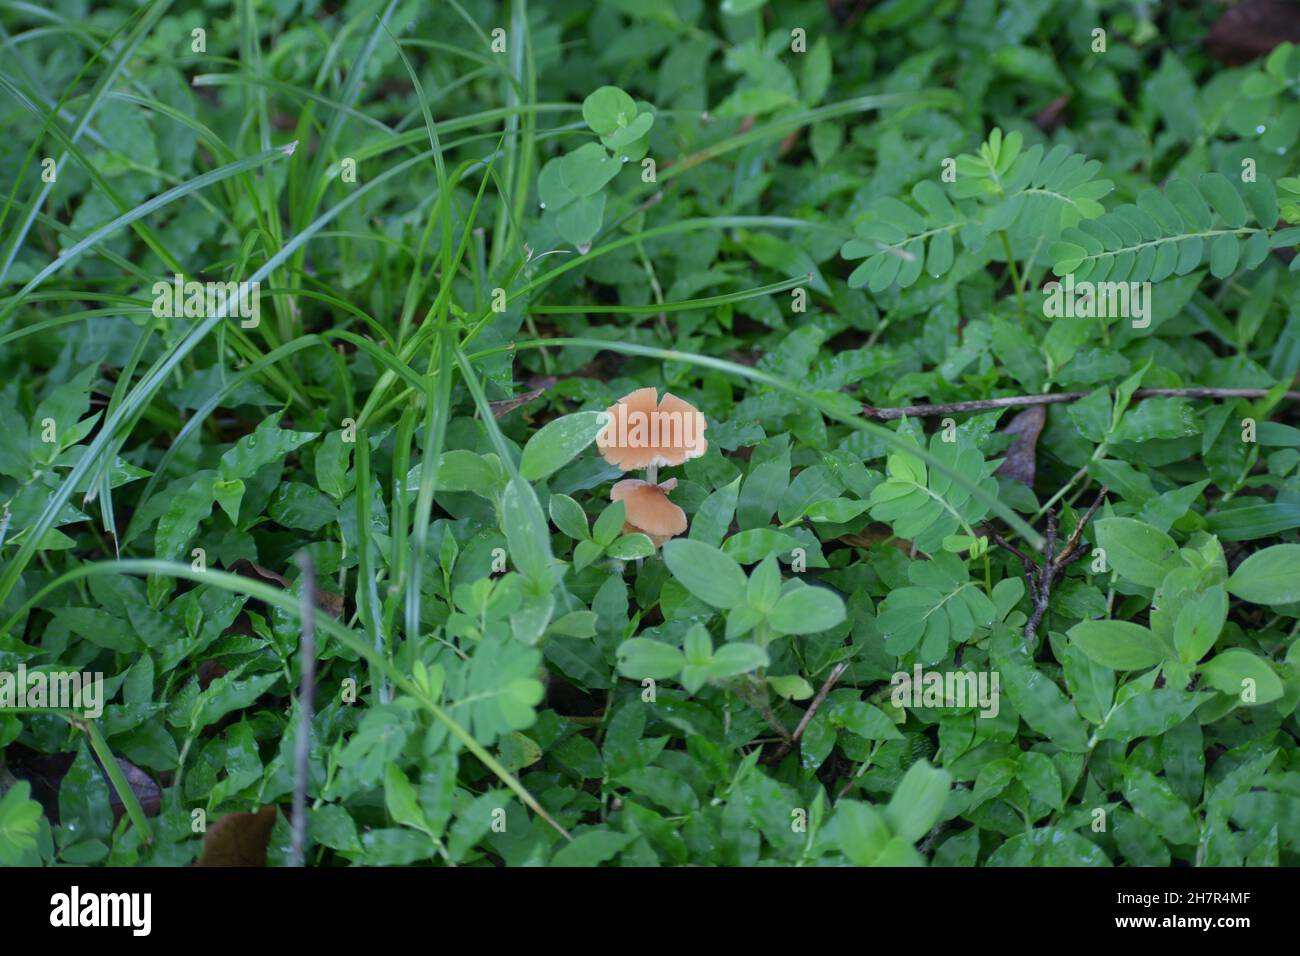 Wild mushrooms appear along the hiking trail. Stock Photo